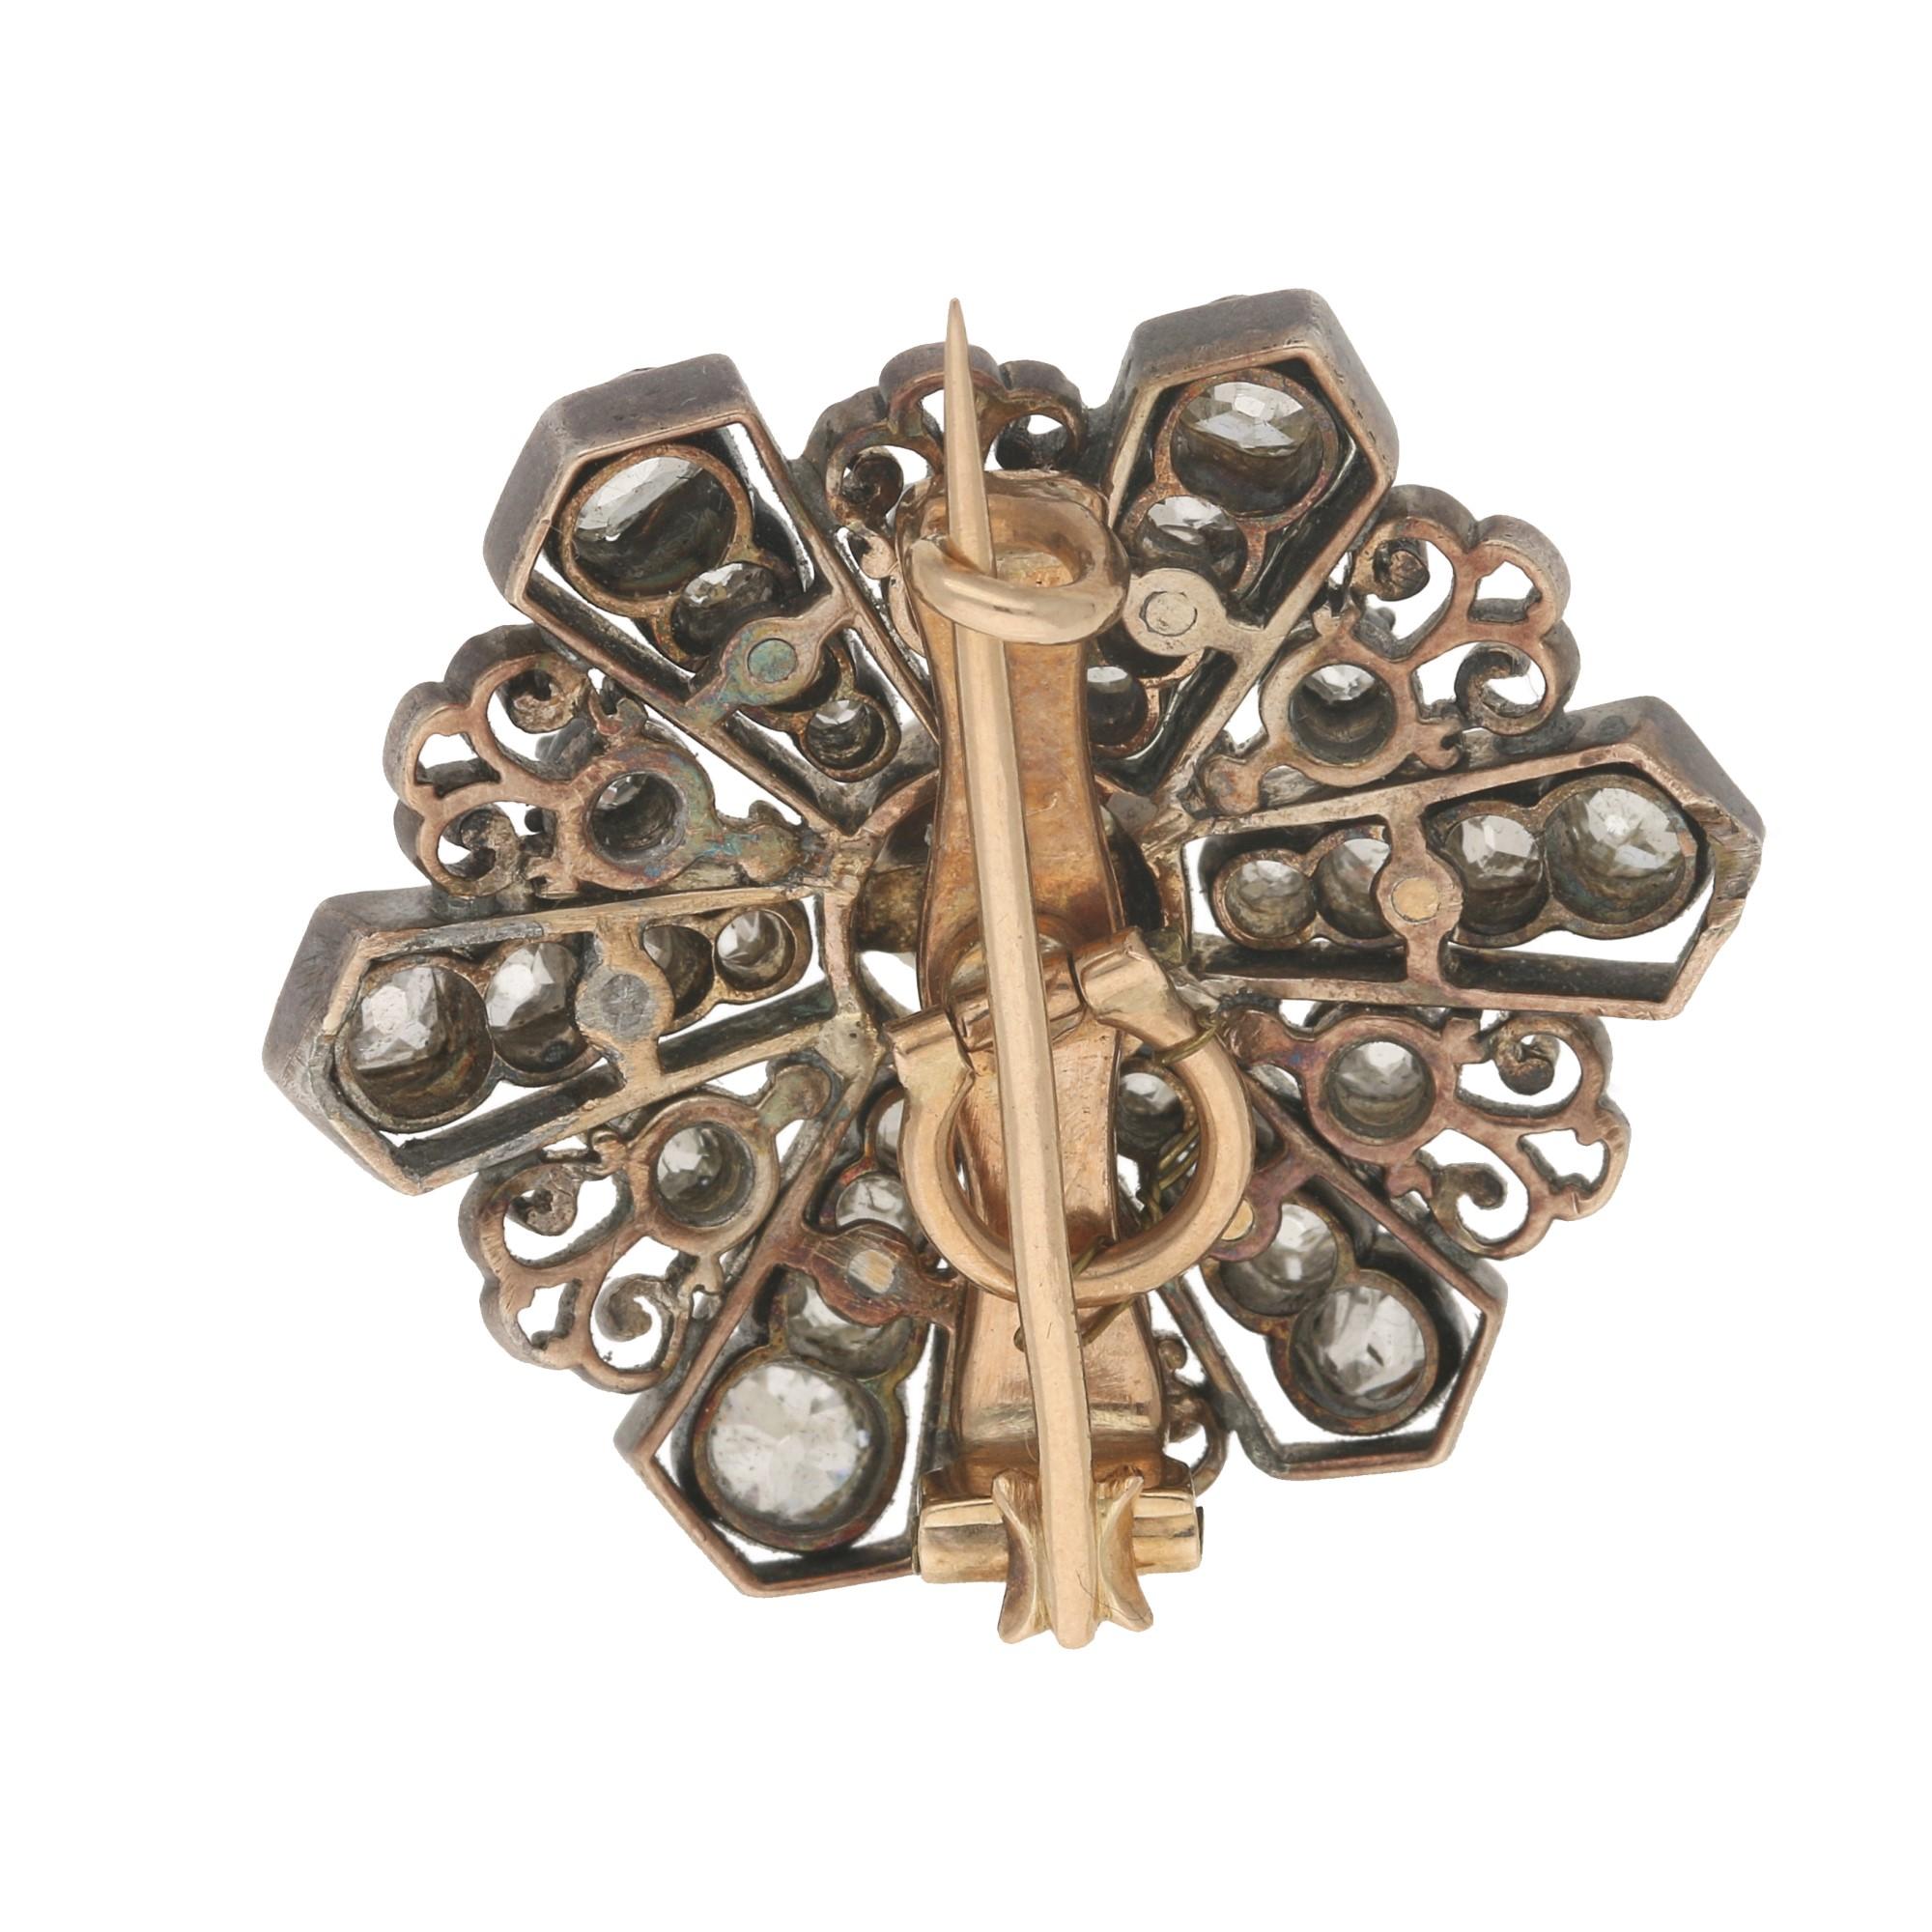 A beautiful Victorian diamond and pearl star brooch set in silver-on-gold. 

This lovely little piece is centrally set with a singular cream pearl. From this central pearl six panels of graduating old mine cut diamonds spray out. In-between each